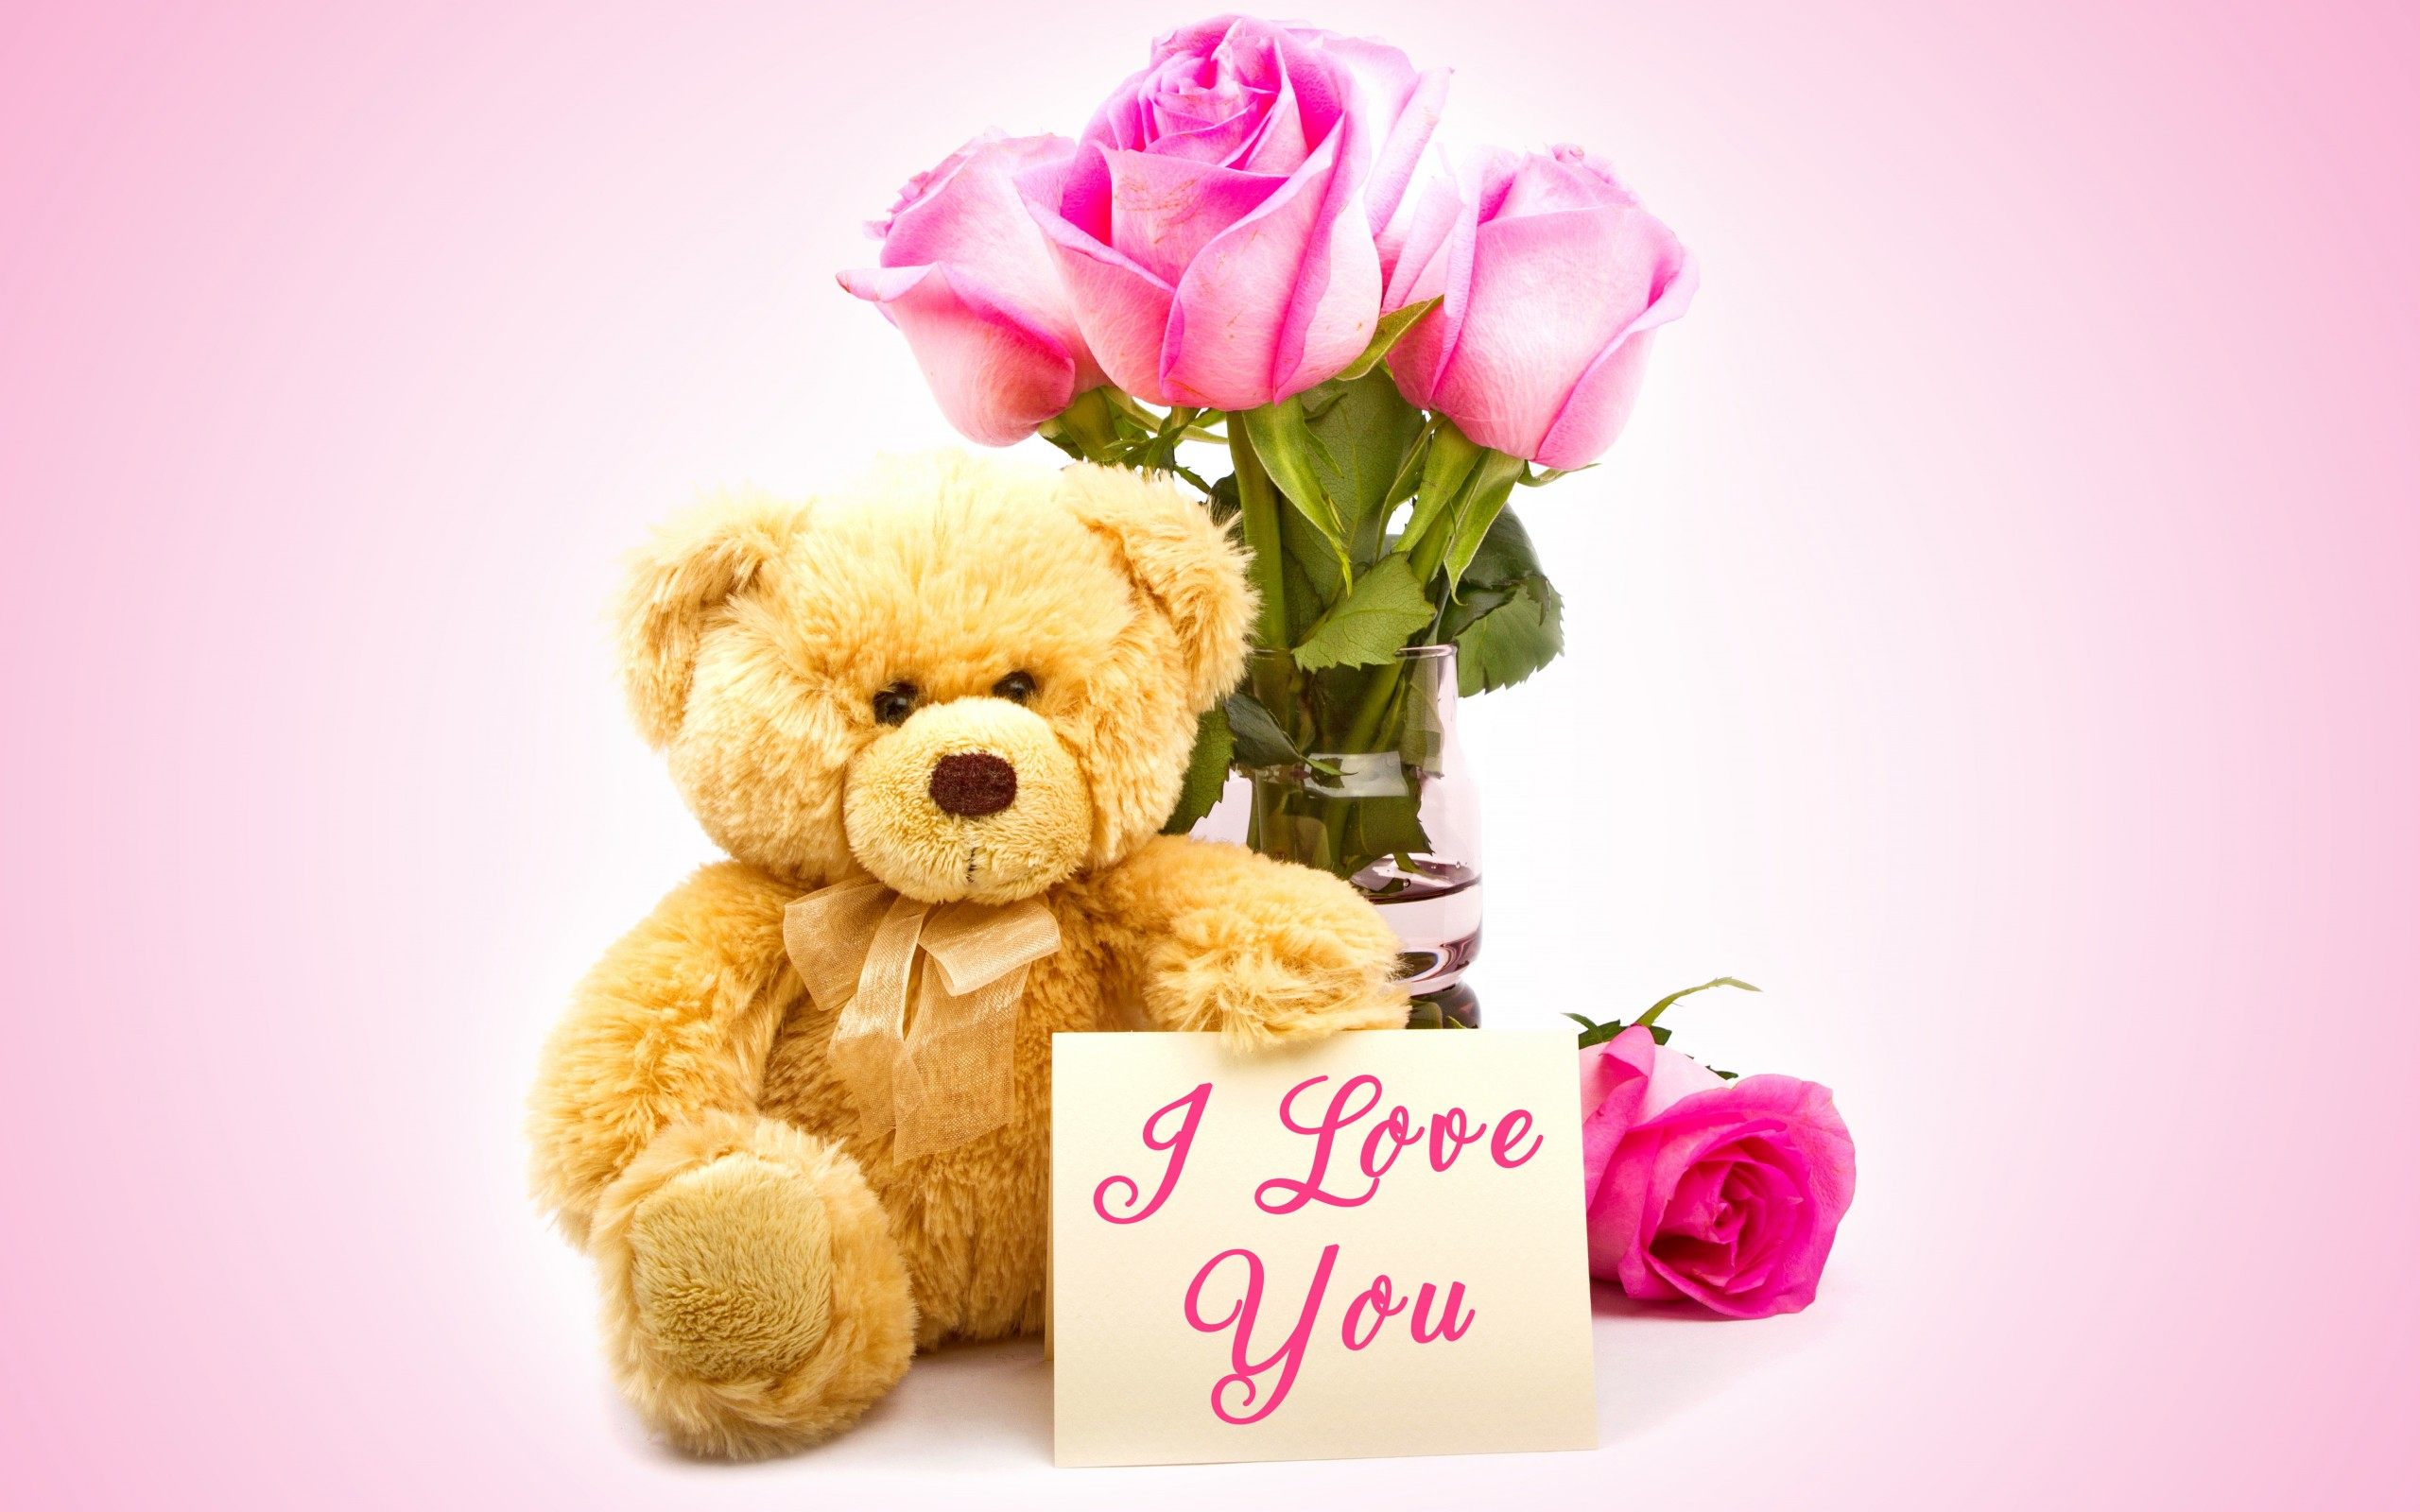 Love Letter - Love You Teddy Bear And Flowers - HD Wallpaper 